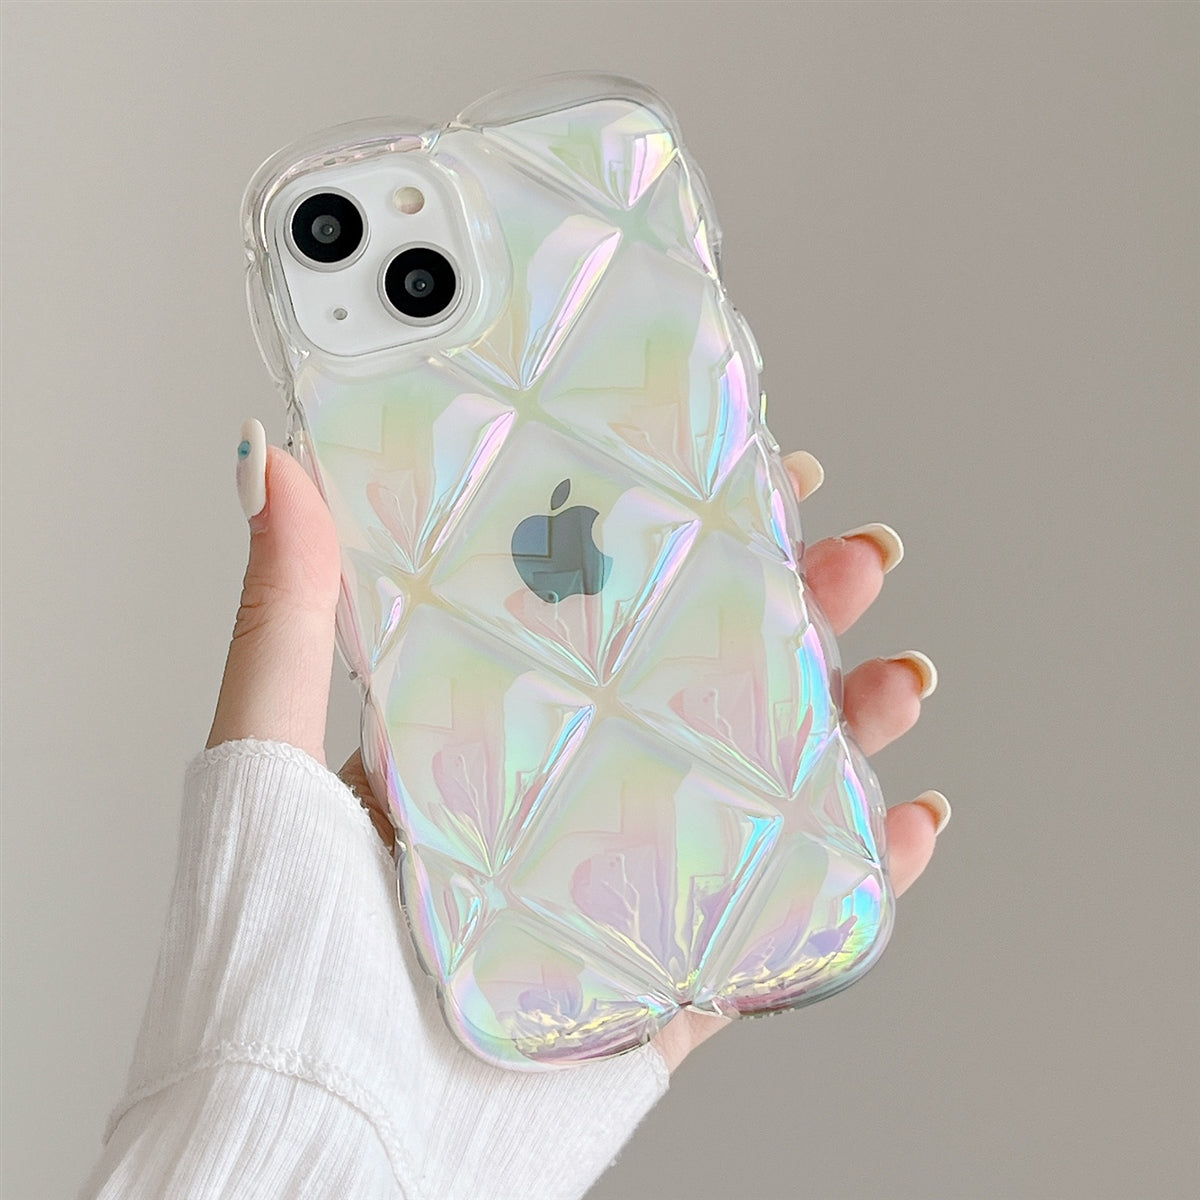 For Apple iPhone 11 Pro Max The Puffer Design Transparent